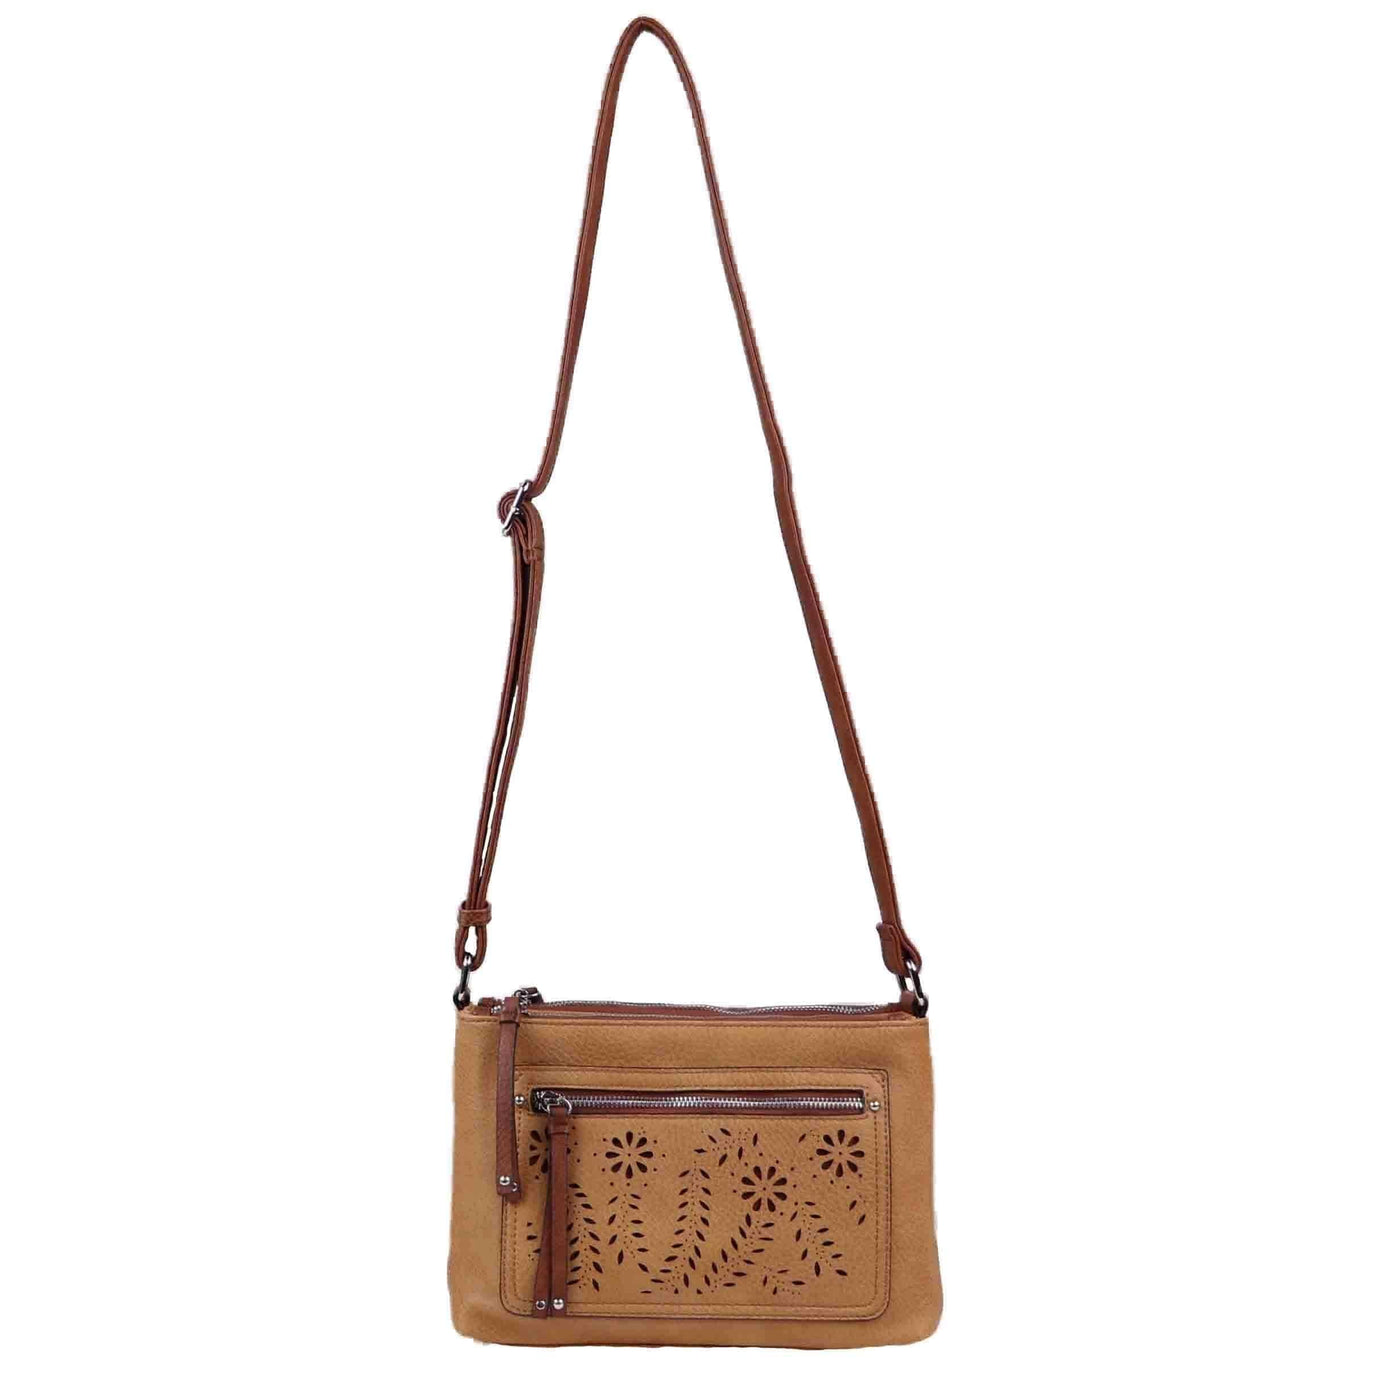 Lady Conceal Concealed Carry Purse Brown Concealed Carry Hailey Crossbody Bag by Lady Conceal